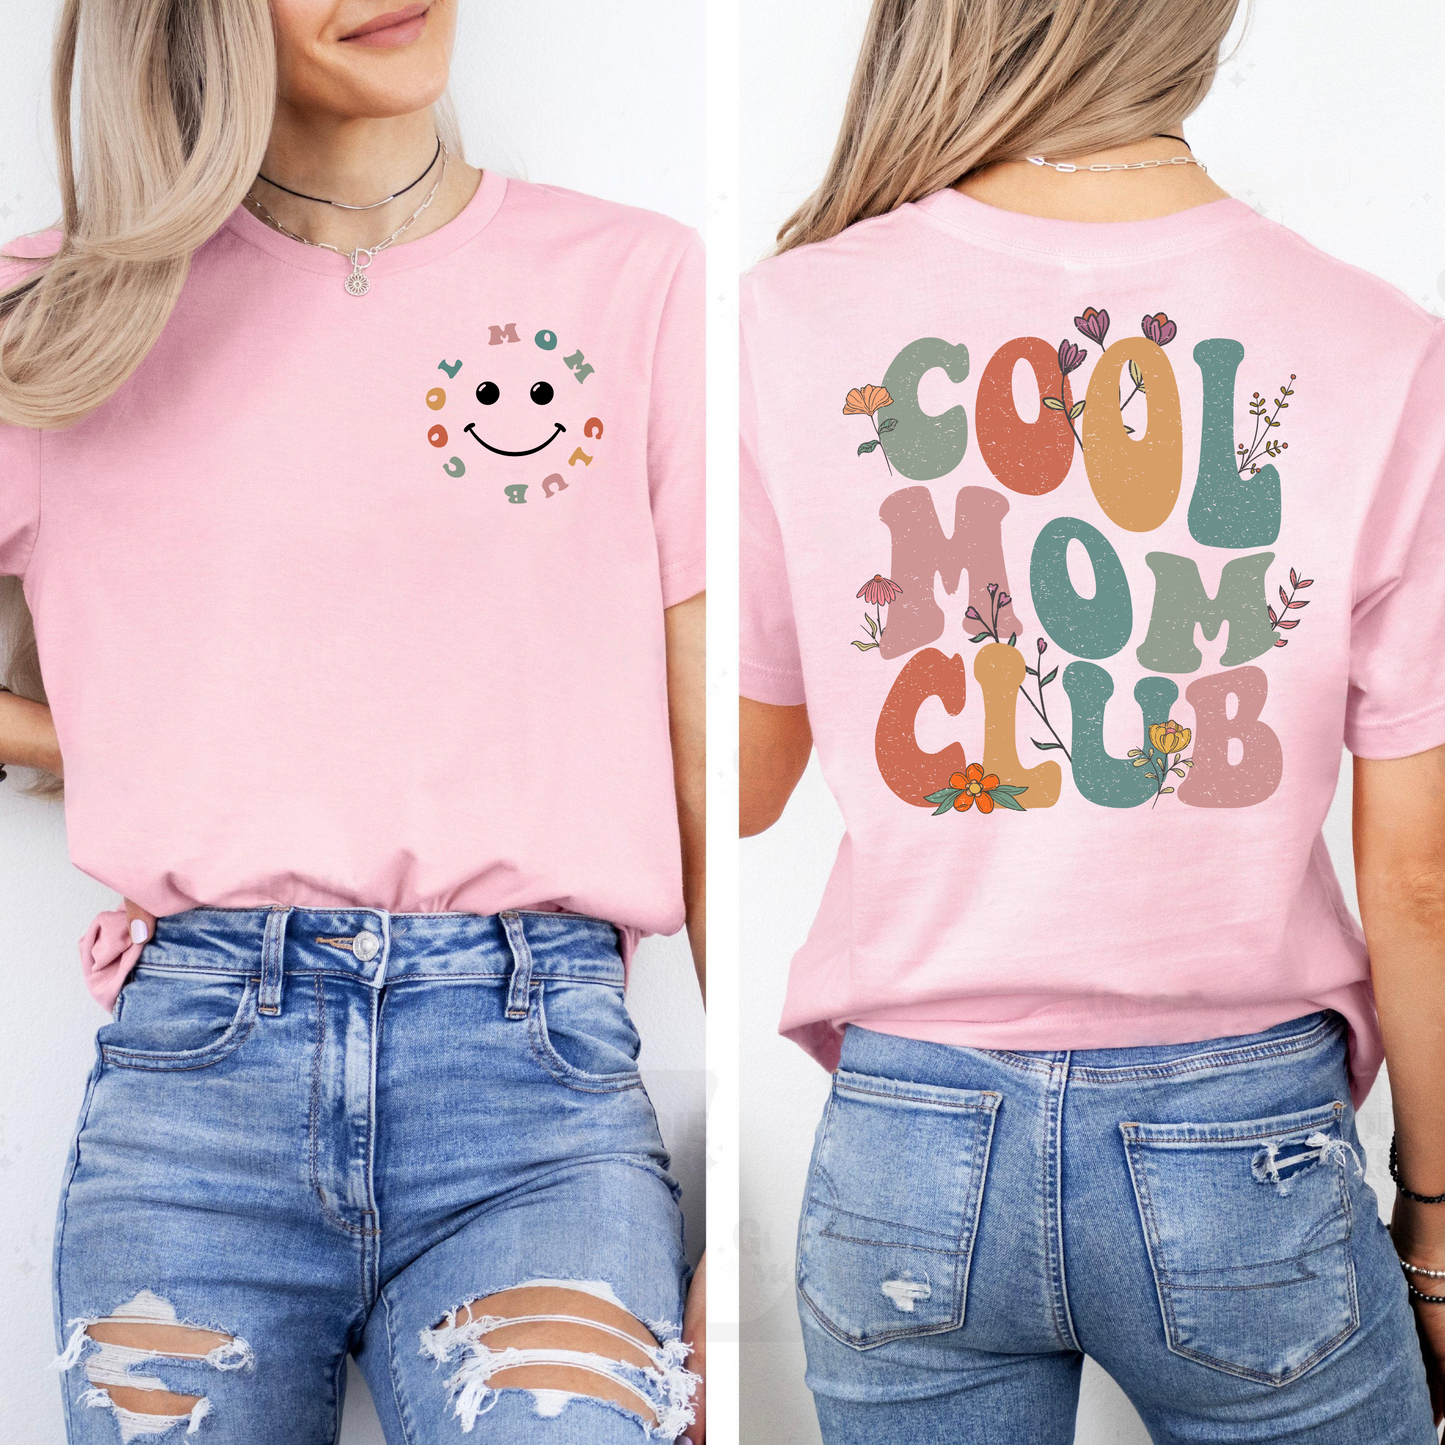 Cool Moms Club - Ideal Gift for the Stylish Mother